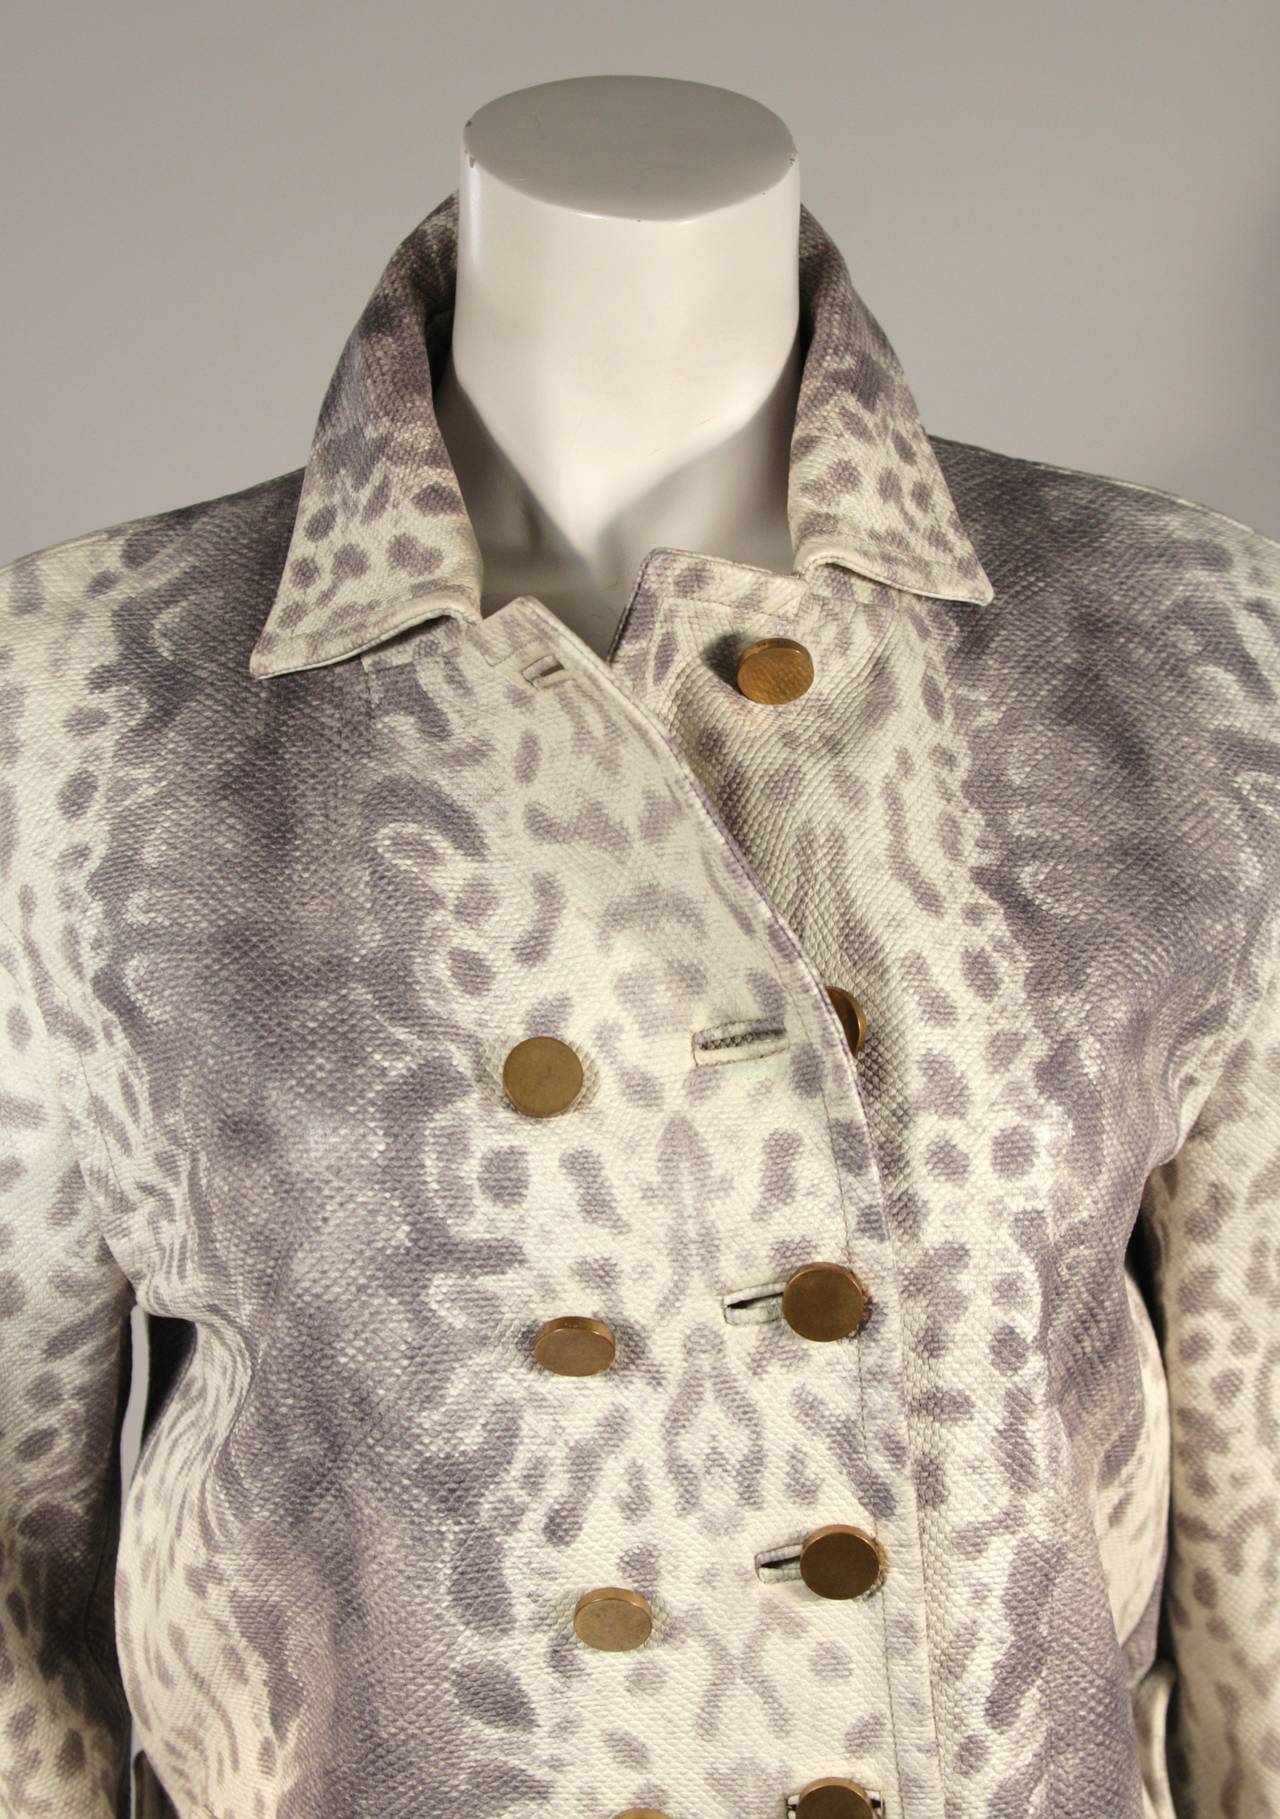 This Gucci jacket features a grey hued snake print fabric and center front buttons. Comes with original tags. Made in Italy.

Measures (Approximately)
Size 38
Length: 28